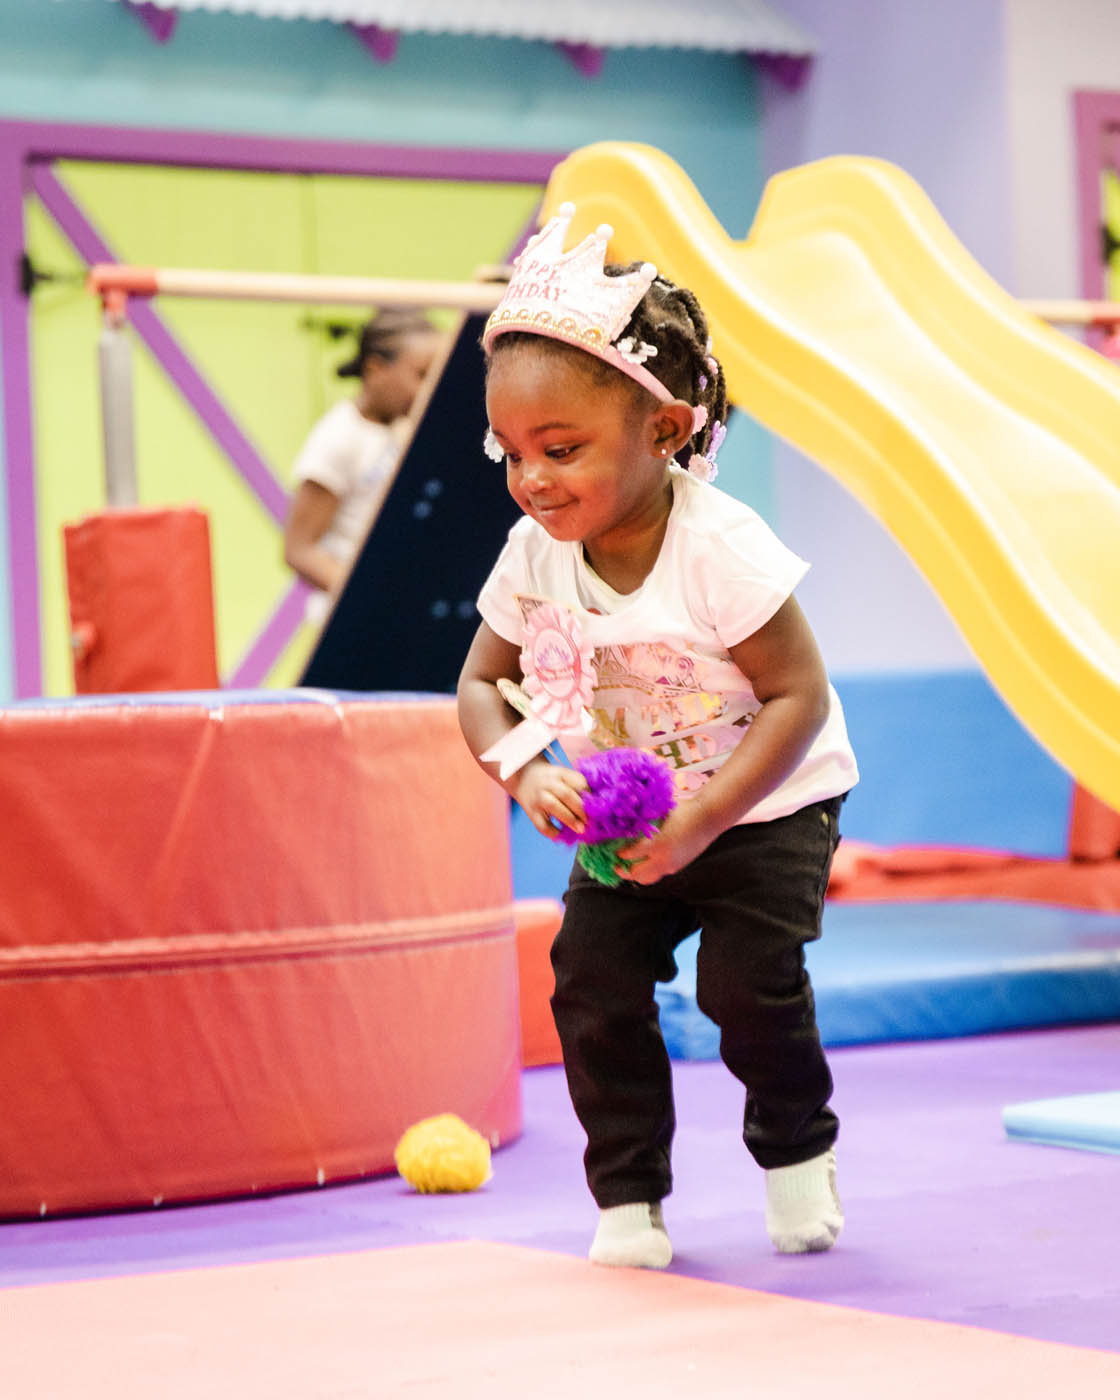 A little girl enjoying her b day party at Romp n' Roll Wethersfield kids birthday party places.